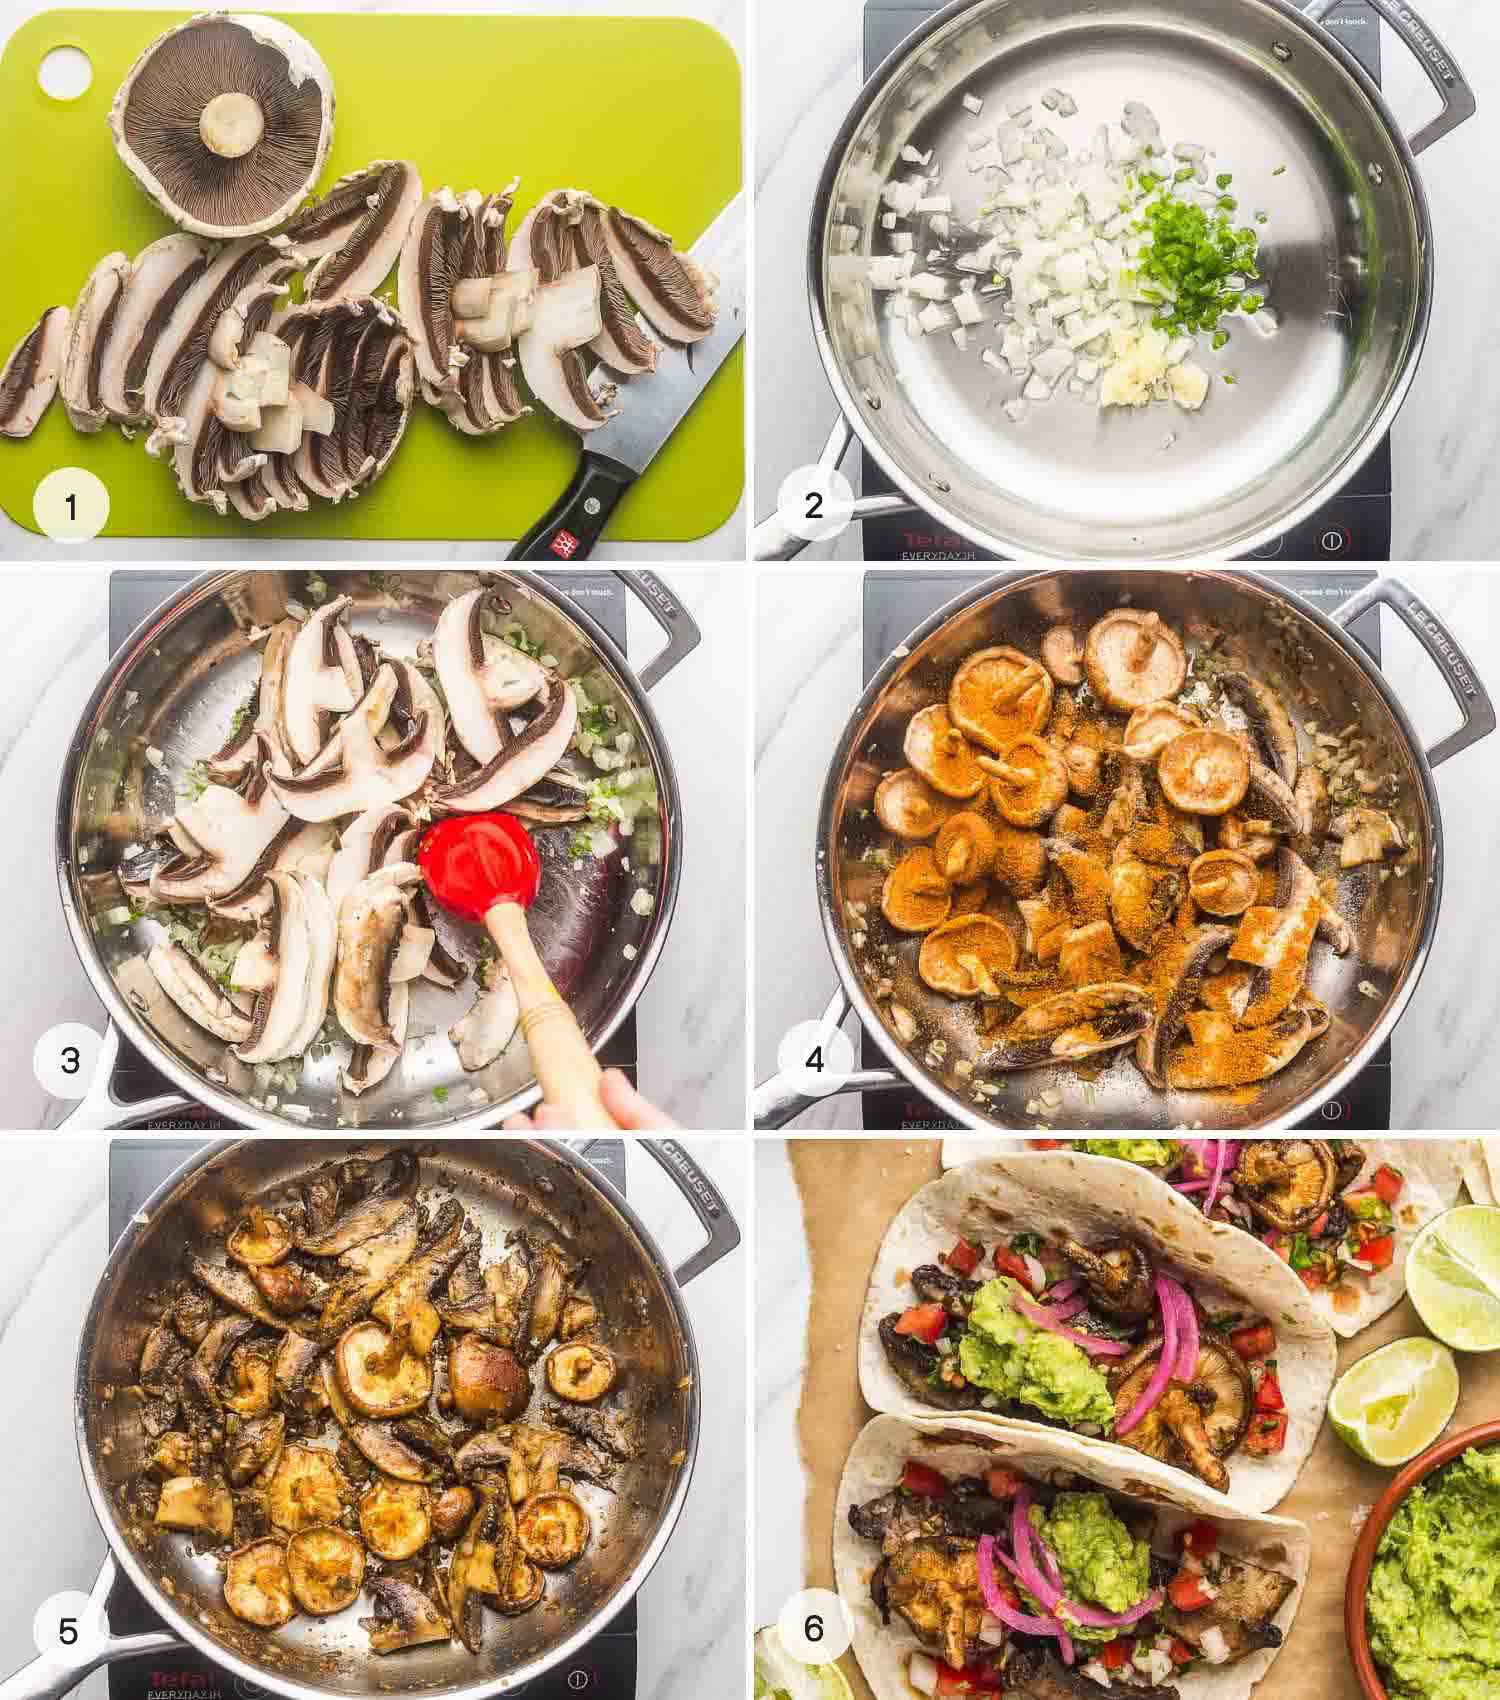 A collage with 6 images how to make mushroom tacos